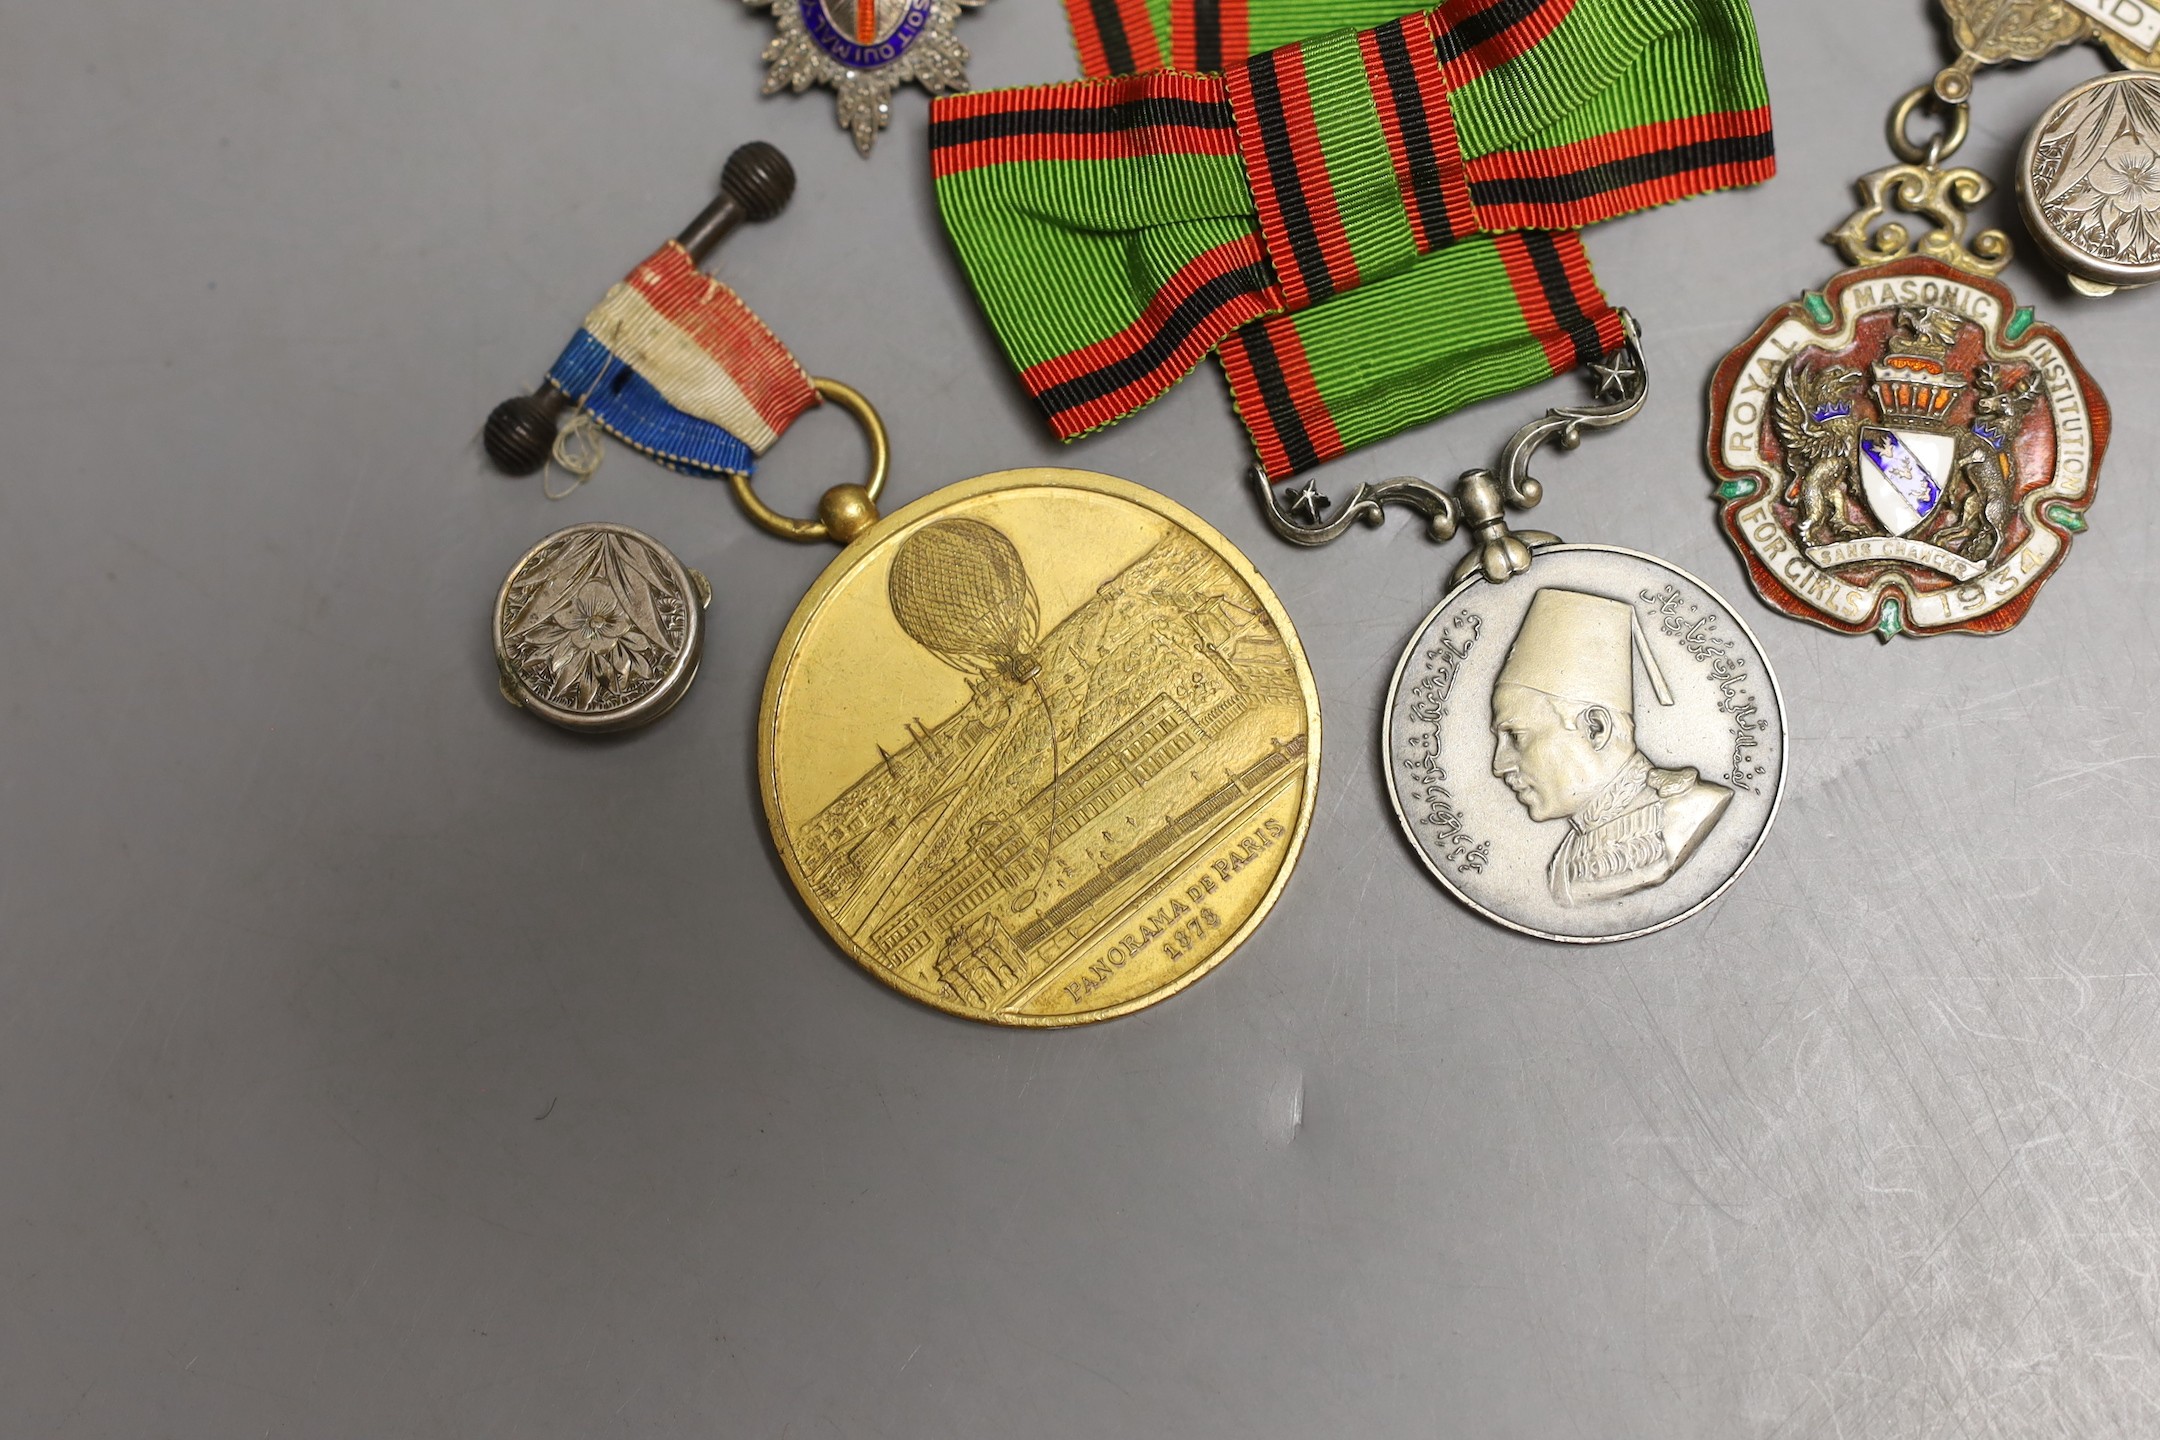 Five military badges and medals and buttons